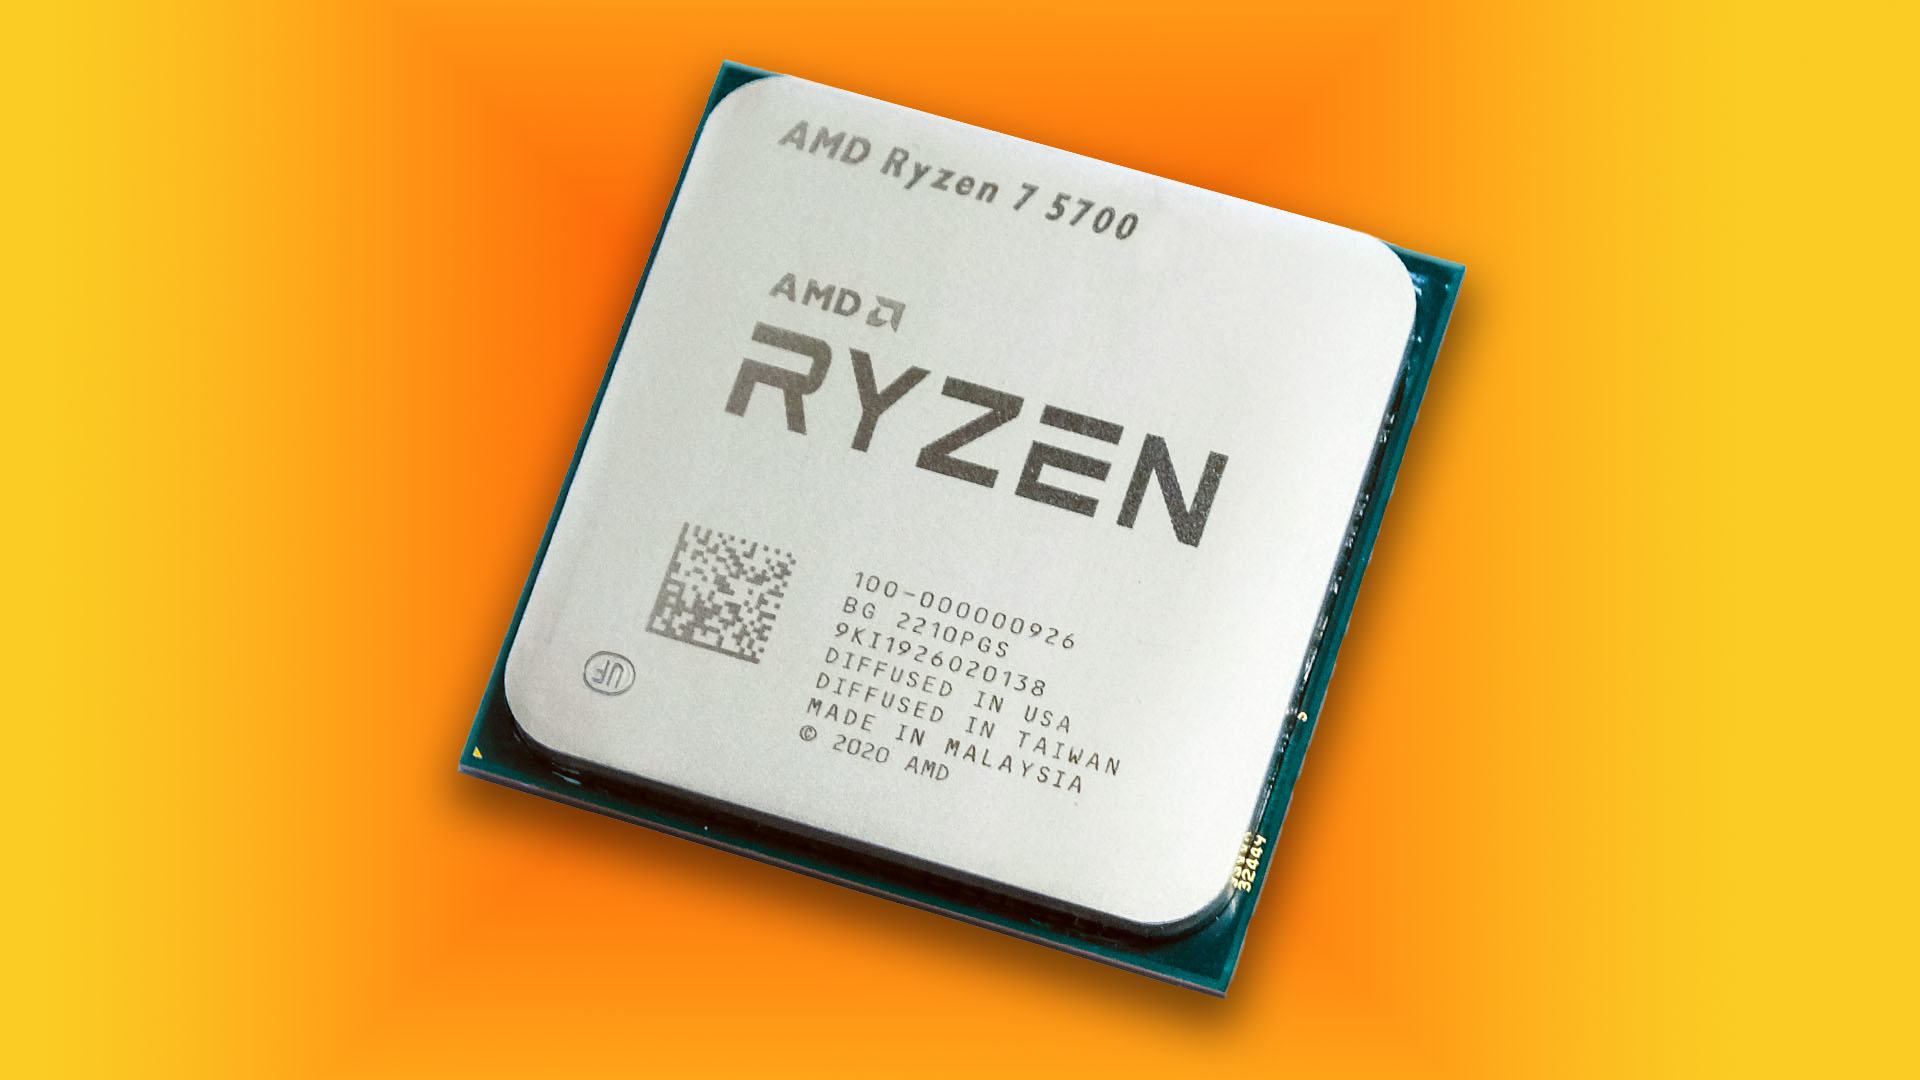 AMD’s new 8-core CPU is bad news for gamers